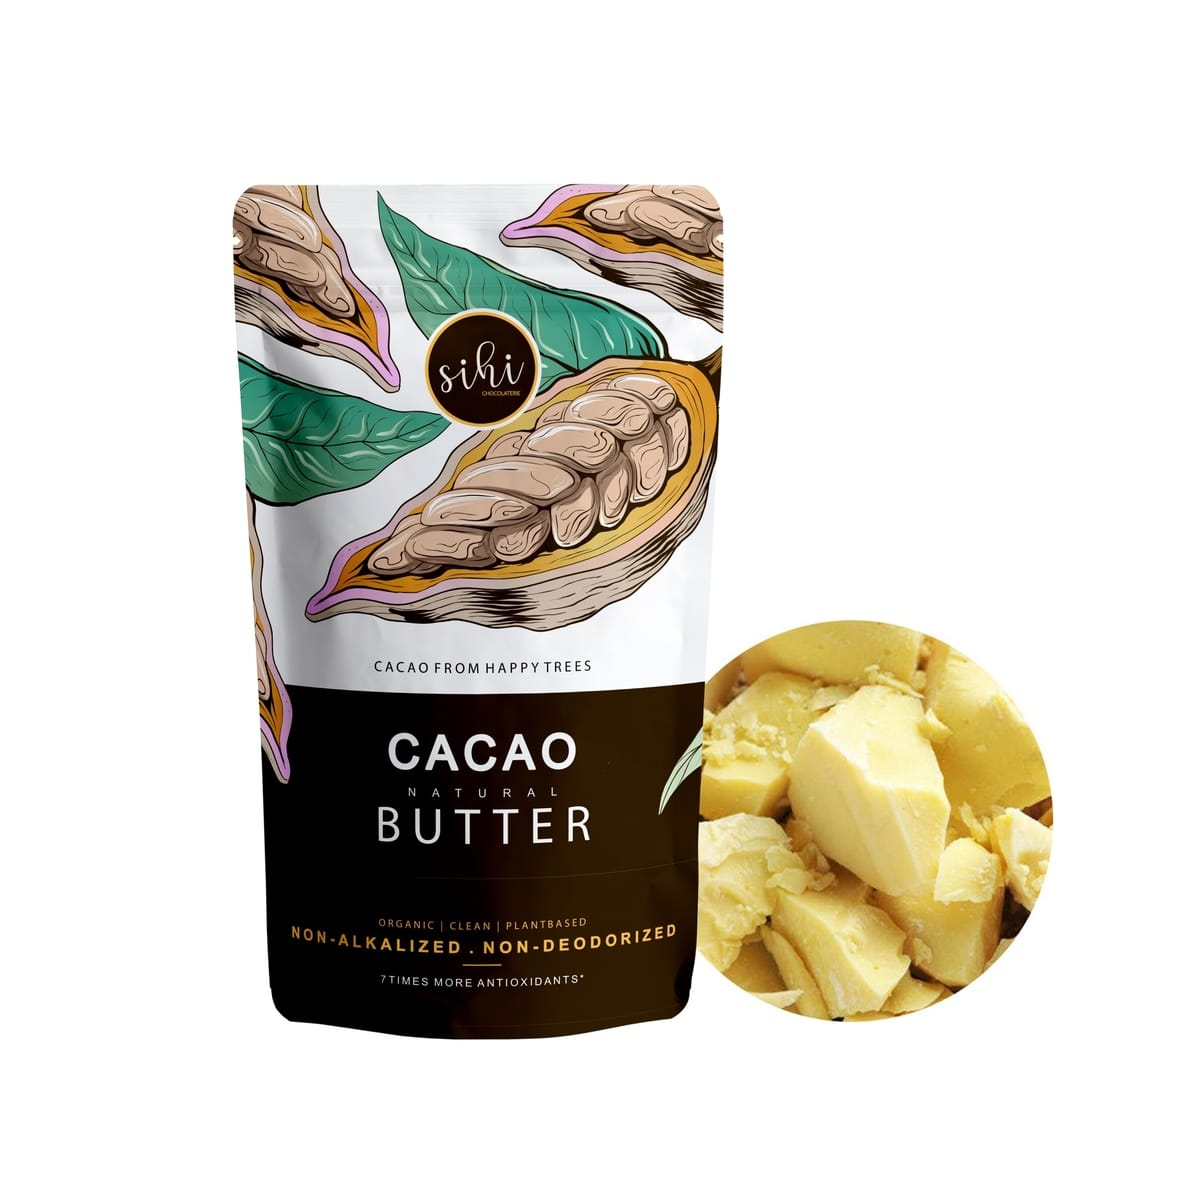 Cacao Butter - Non Alkalised and Non Deodorised